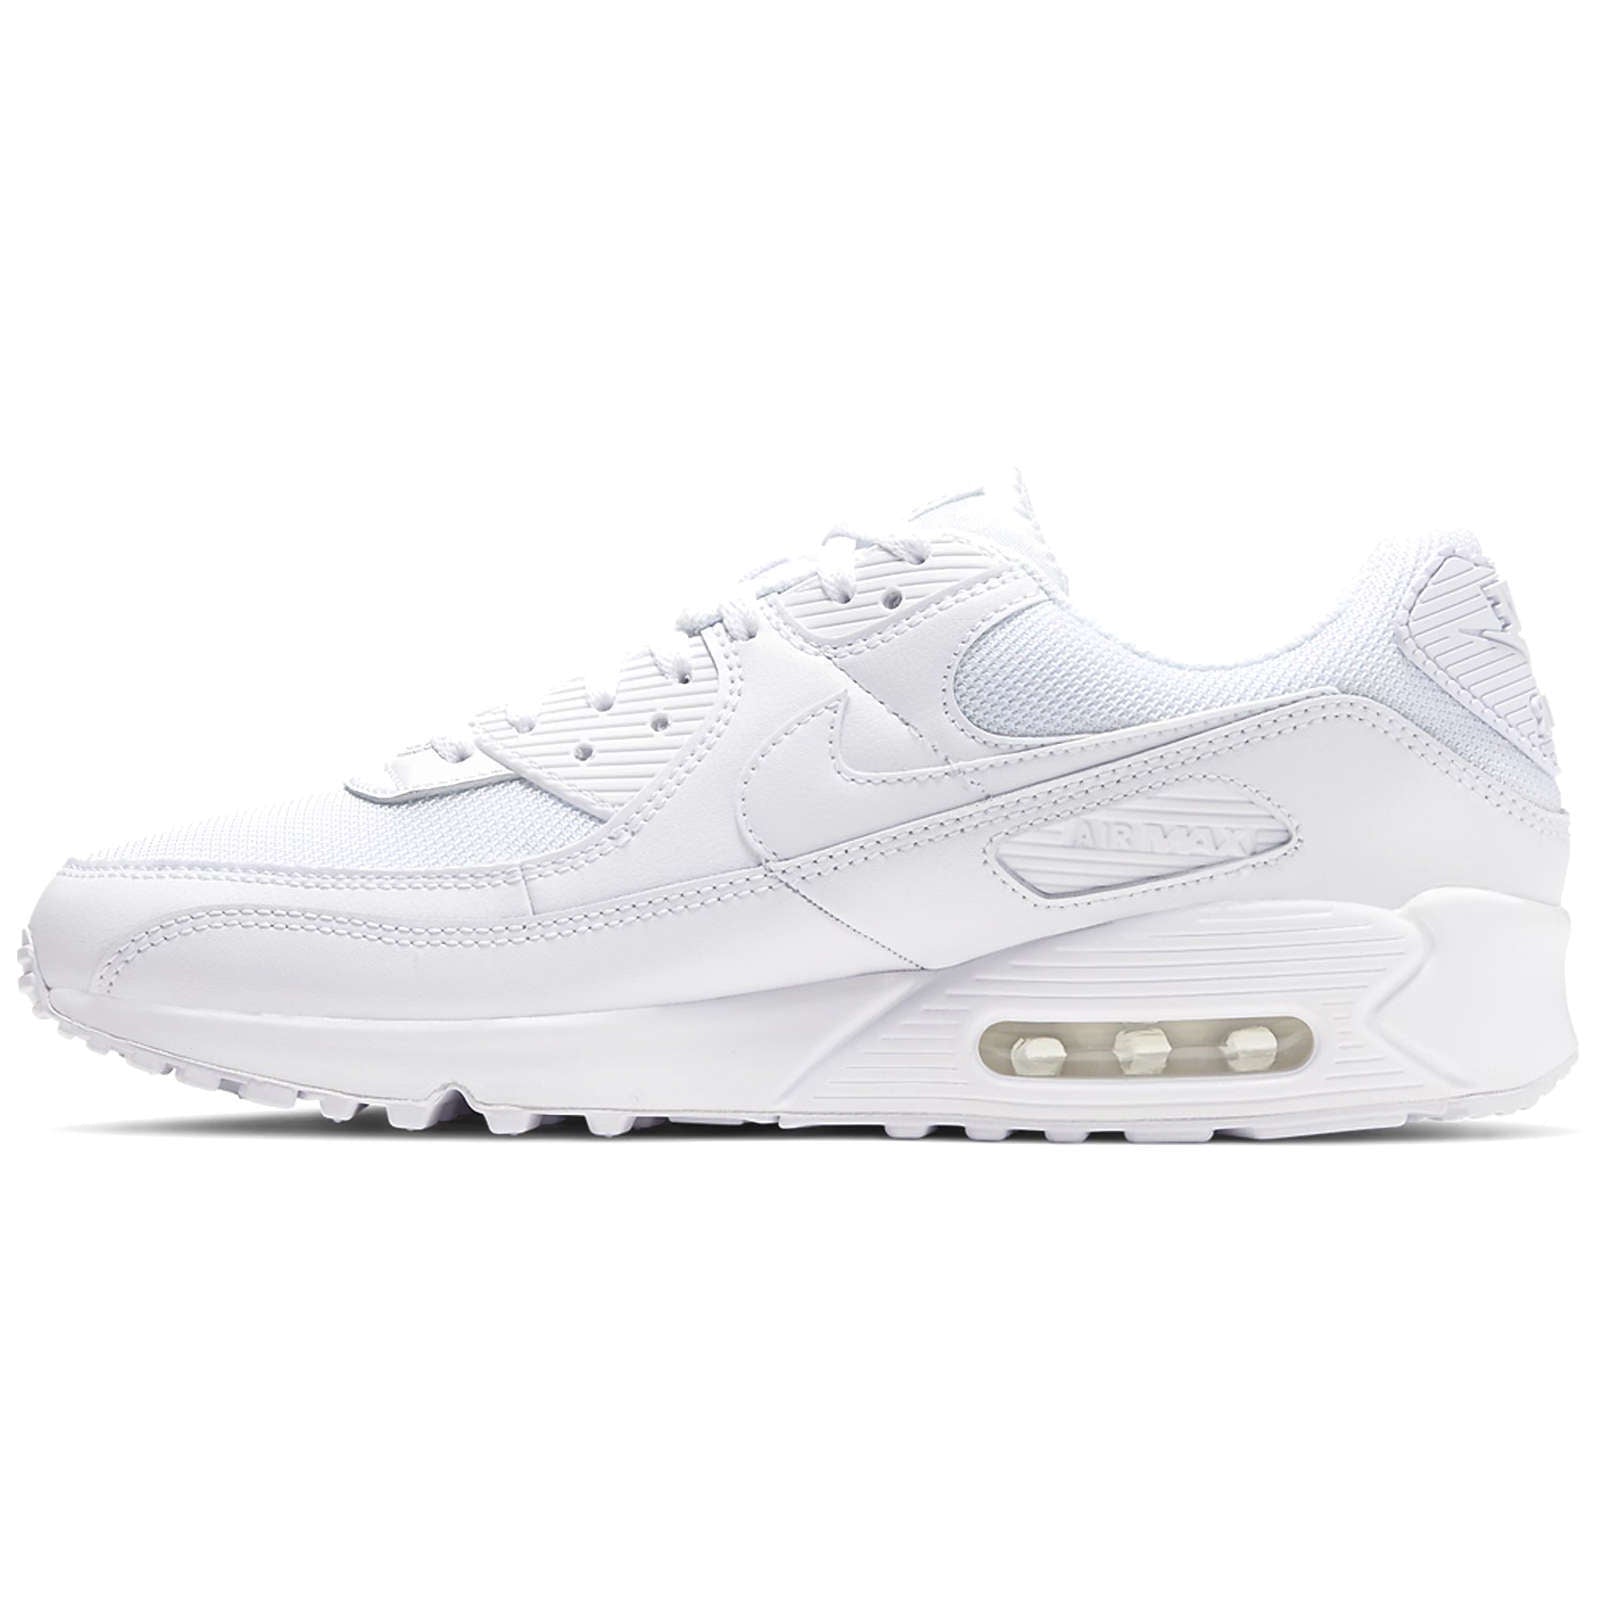 Nike Air Max 90 Textile Leather Men's Low-Top Trainers#color_white wolf grey